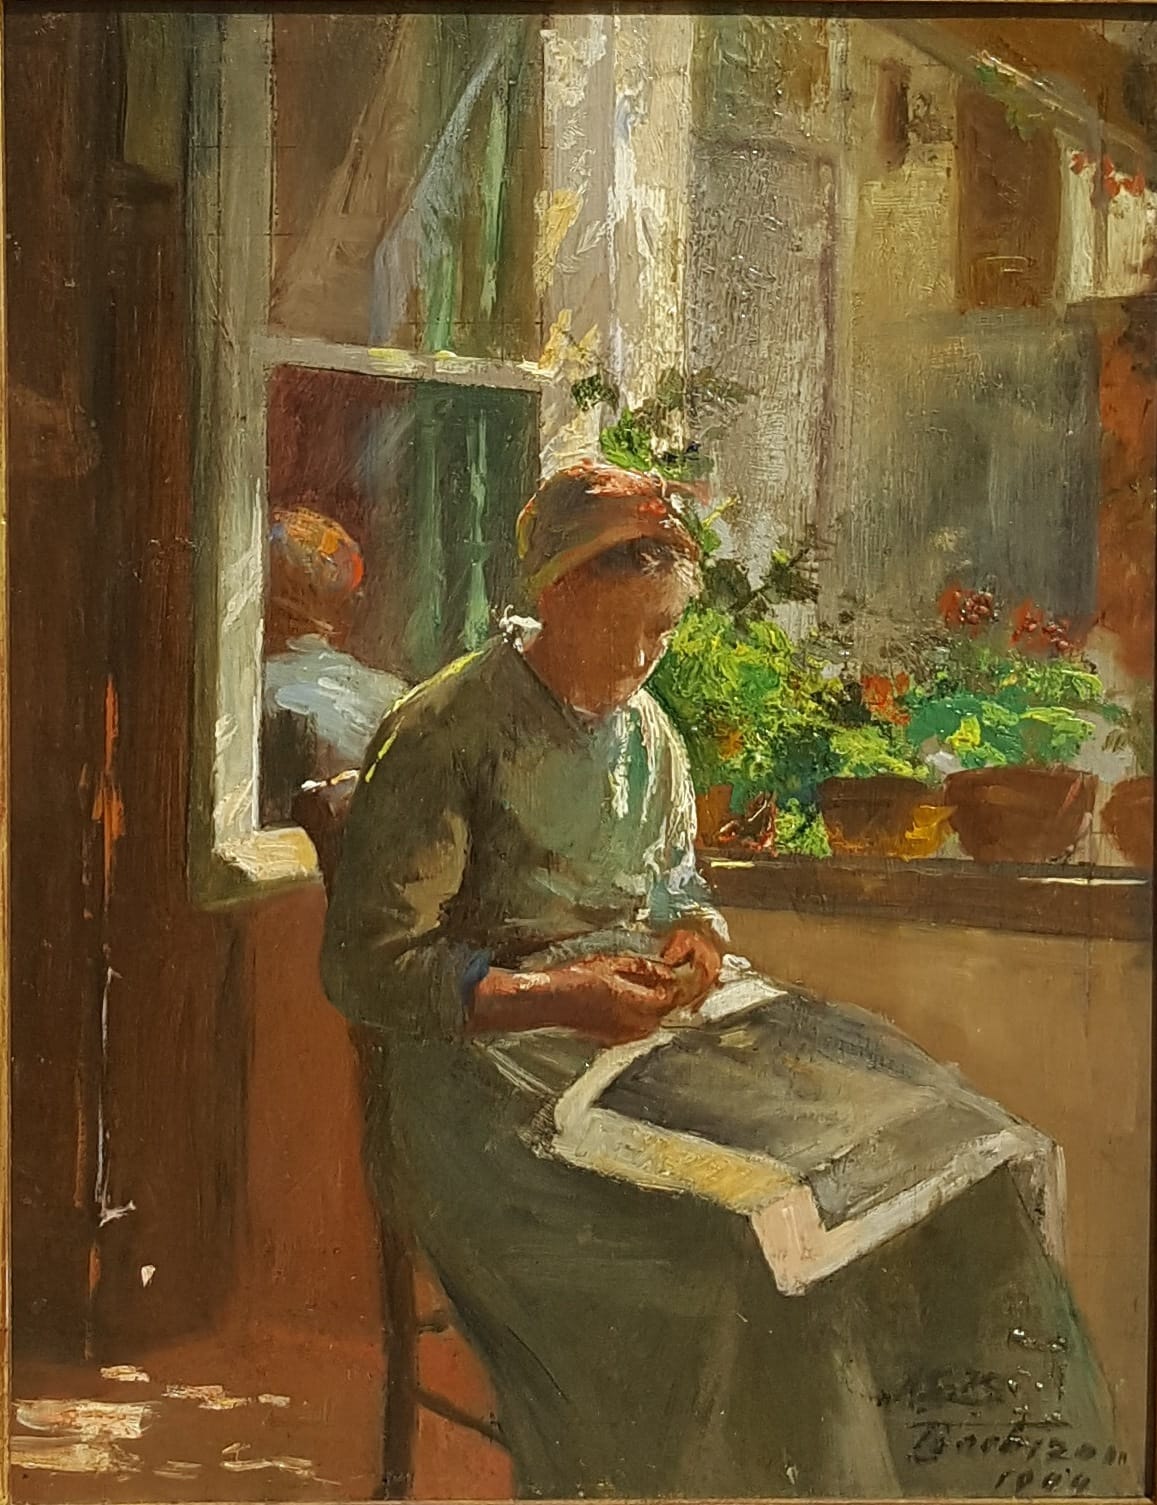 Anna Klumpke's Old Recollections. An elderly woman sits in thought while sewing beside a wide, open widow. Small, red potted flowers sit on the sill.